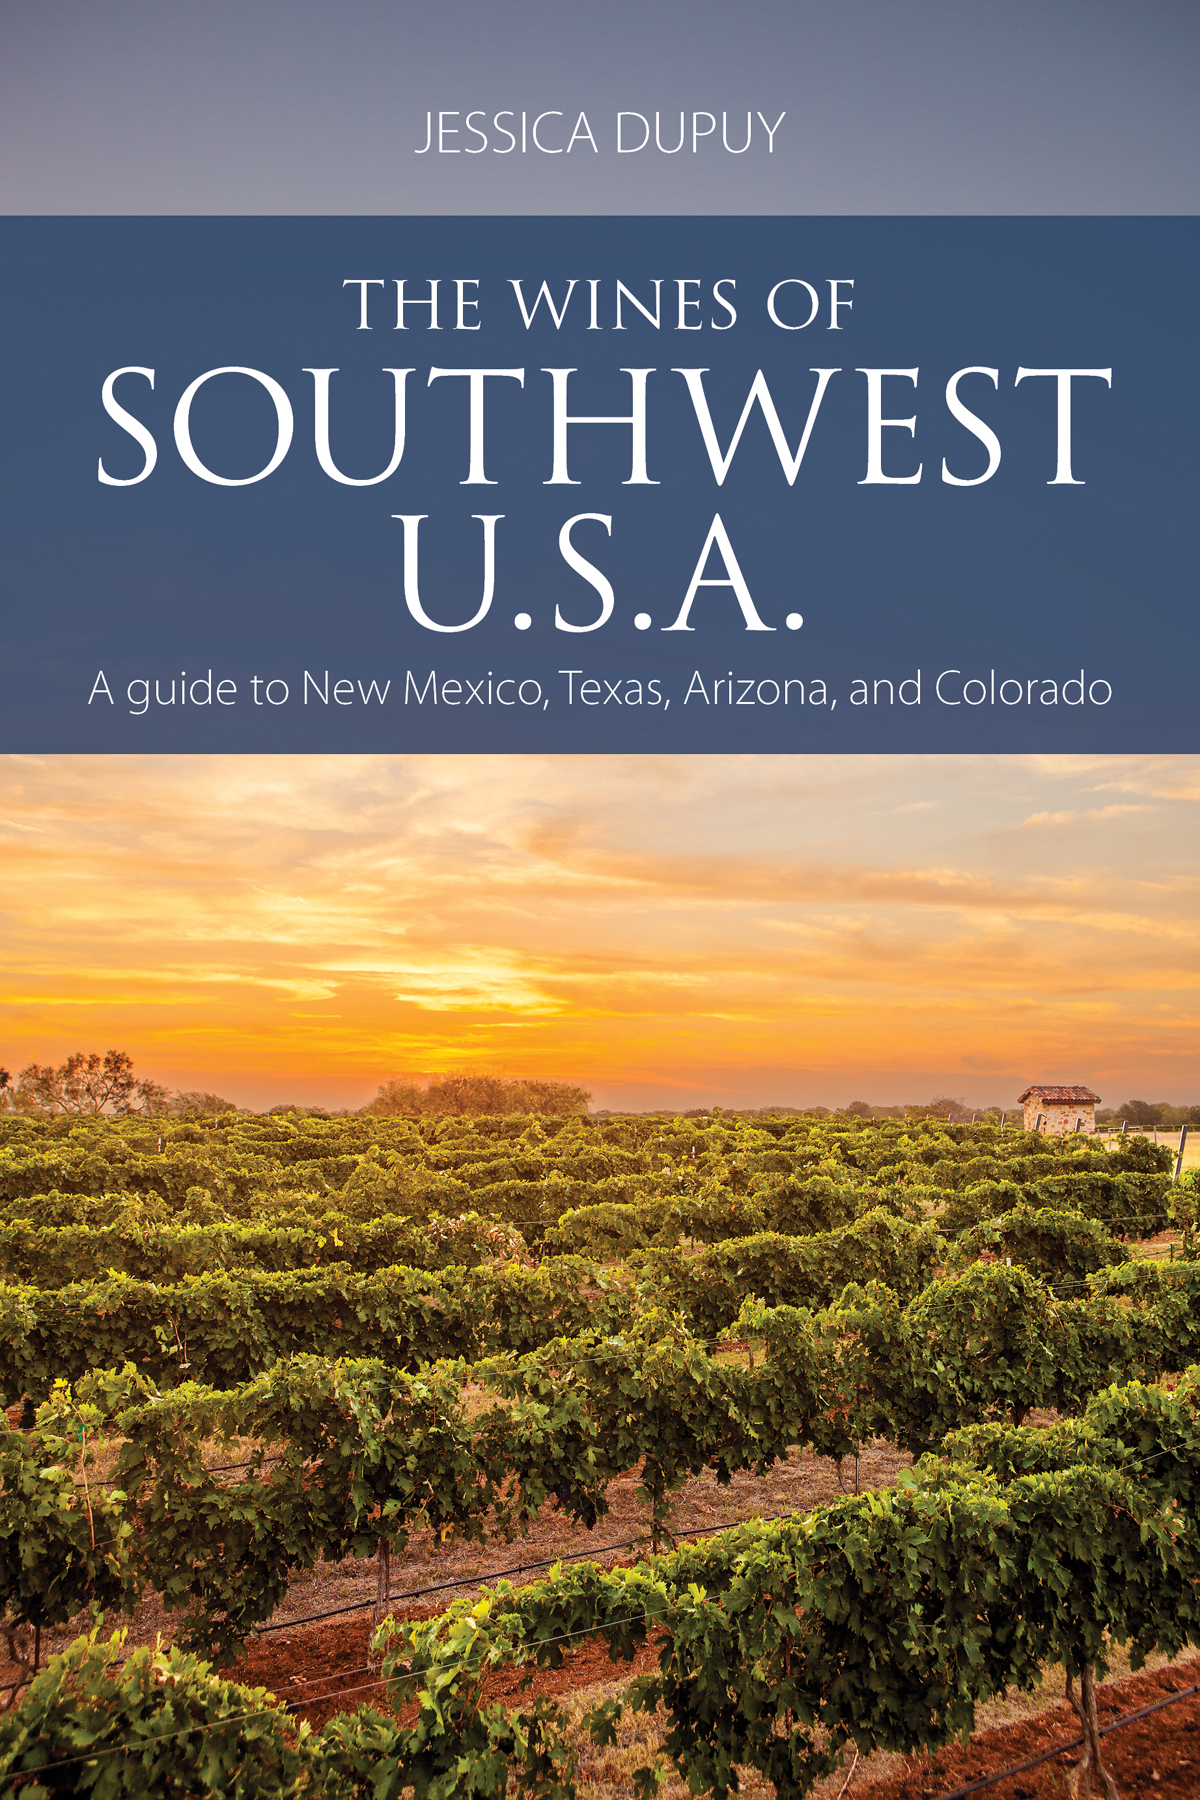 Extract: The wines of Southwest U.S.A. by Jessica Dupuy